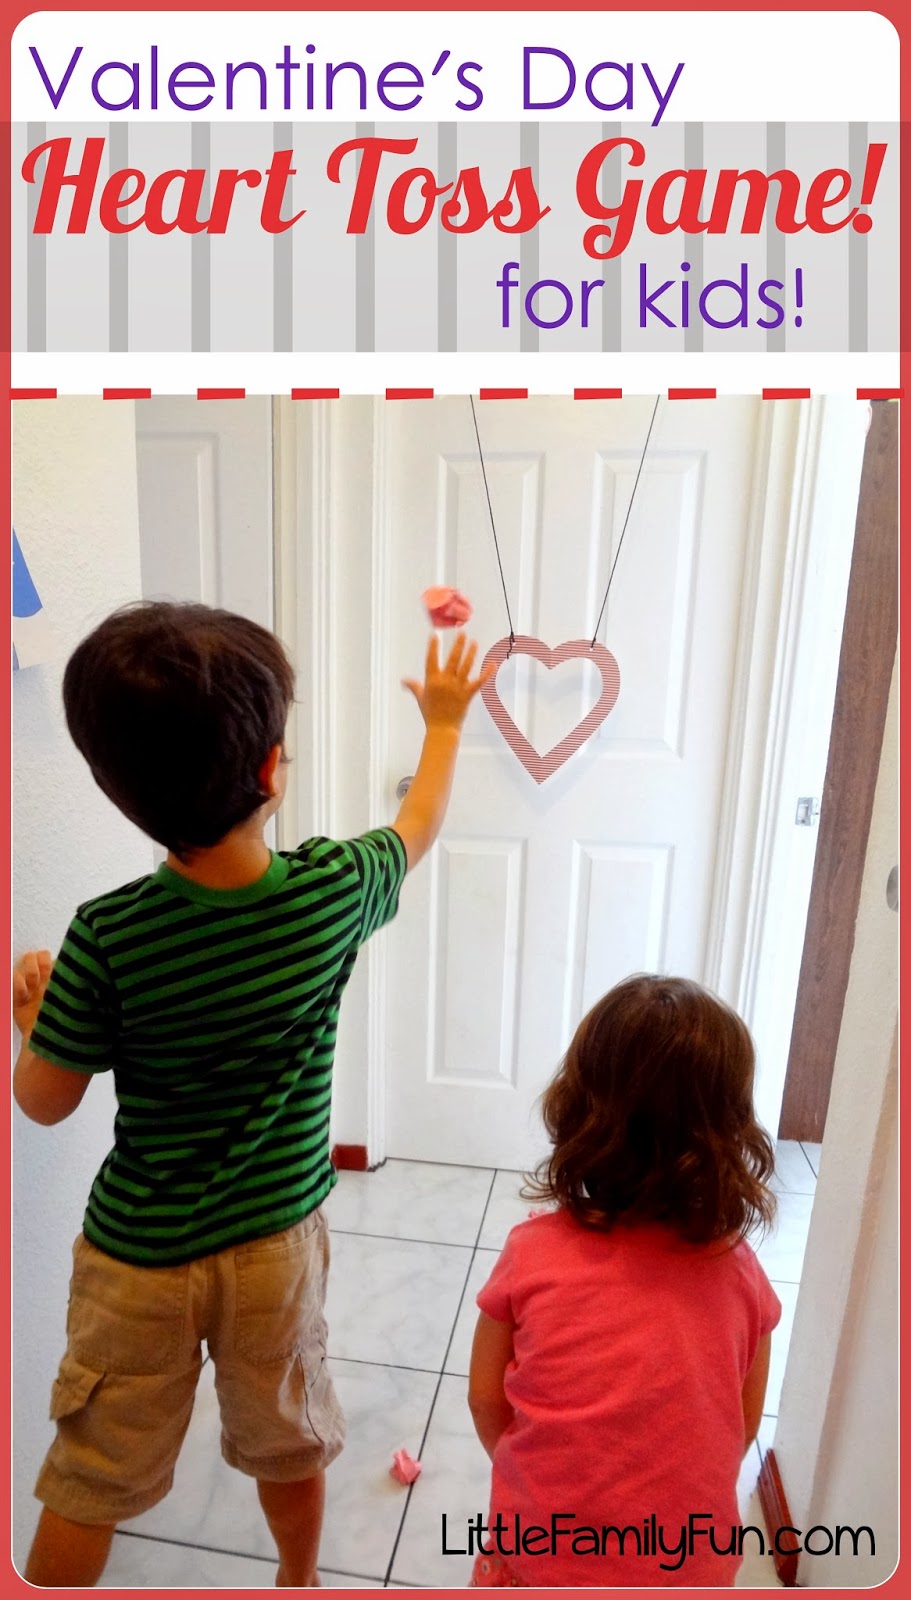 Little Family Fun: Valentine's Day Heart Toss Game